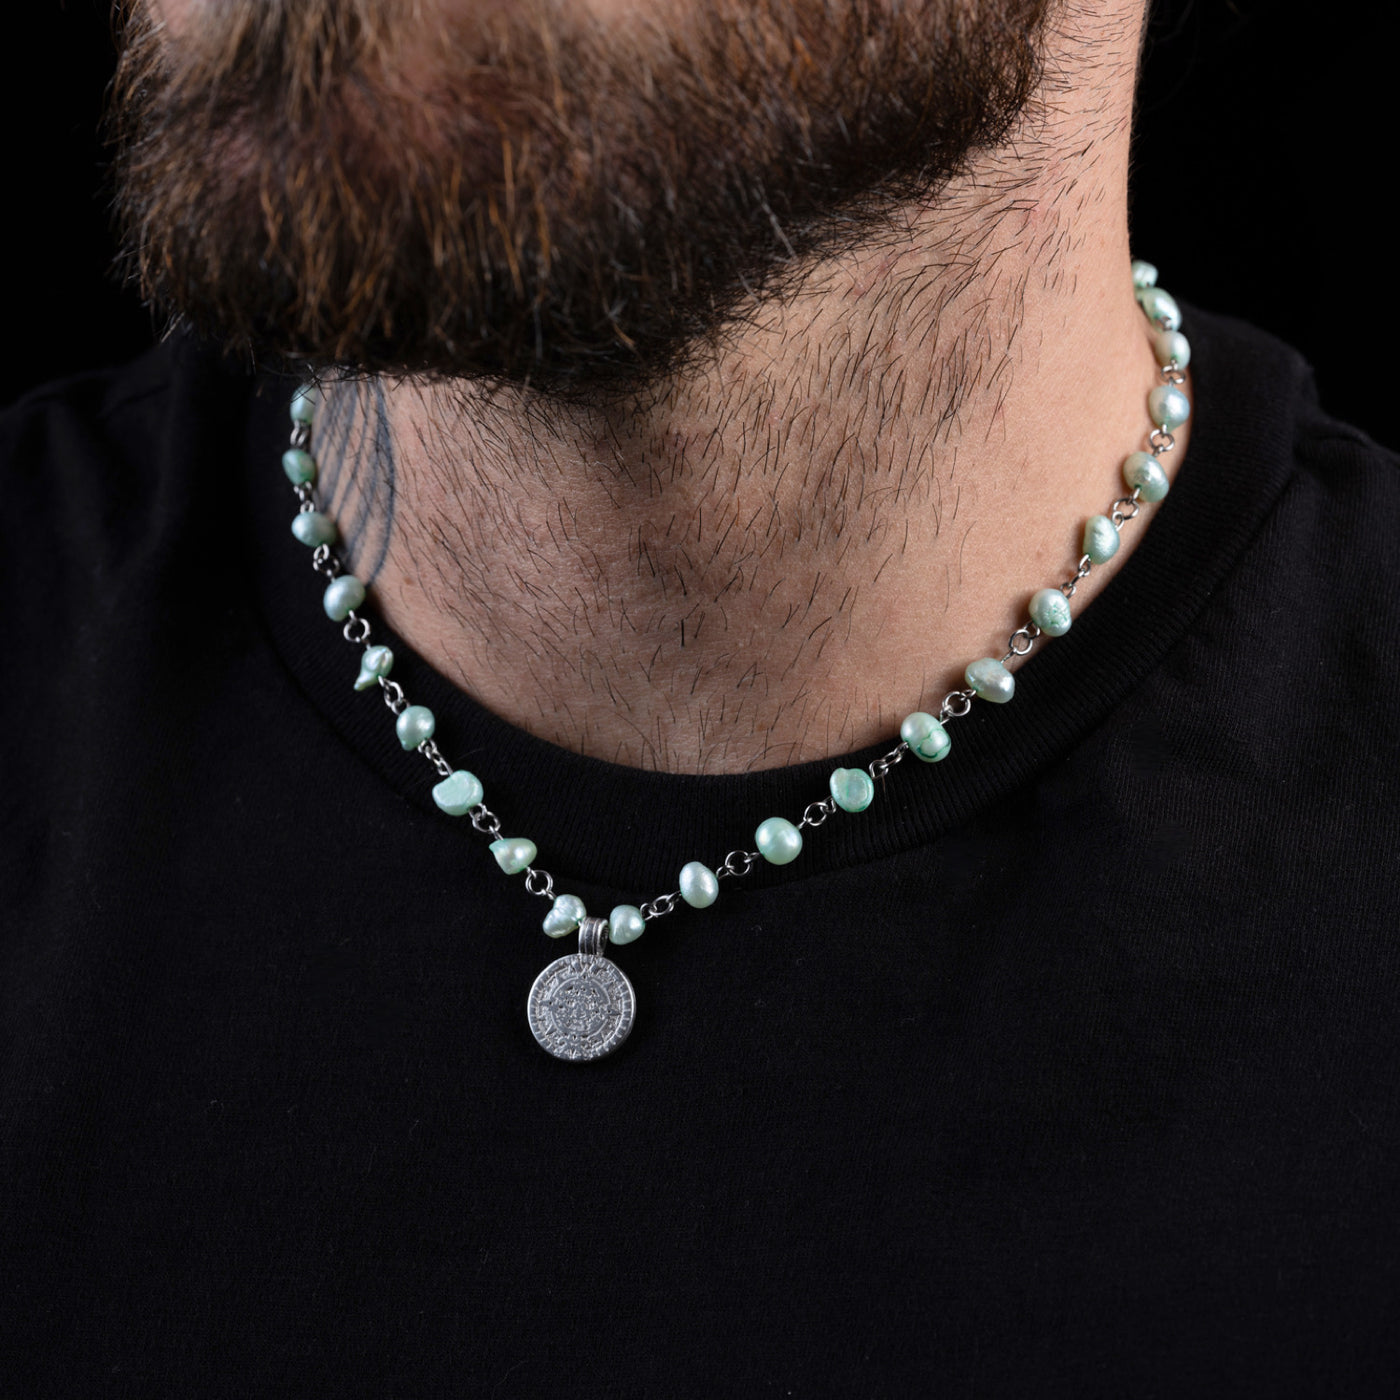 50% OFF Green Pearl Coin Necklace!